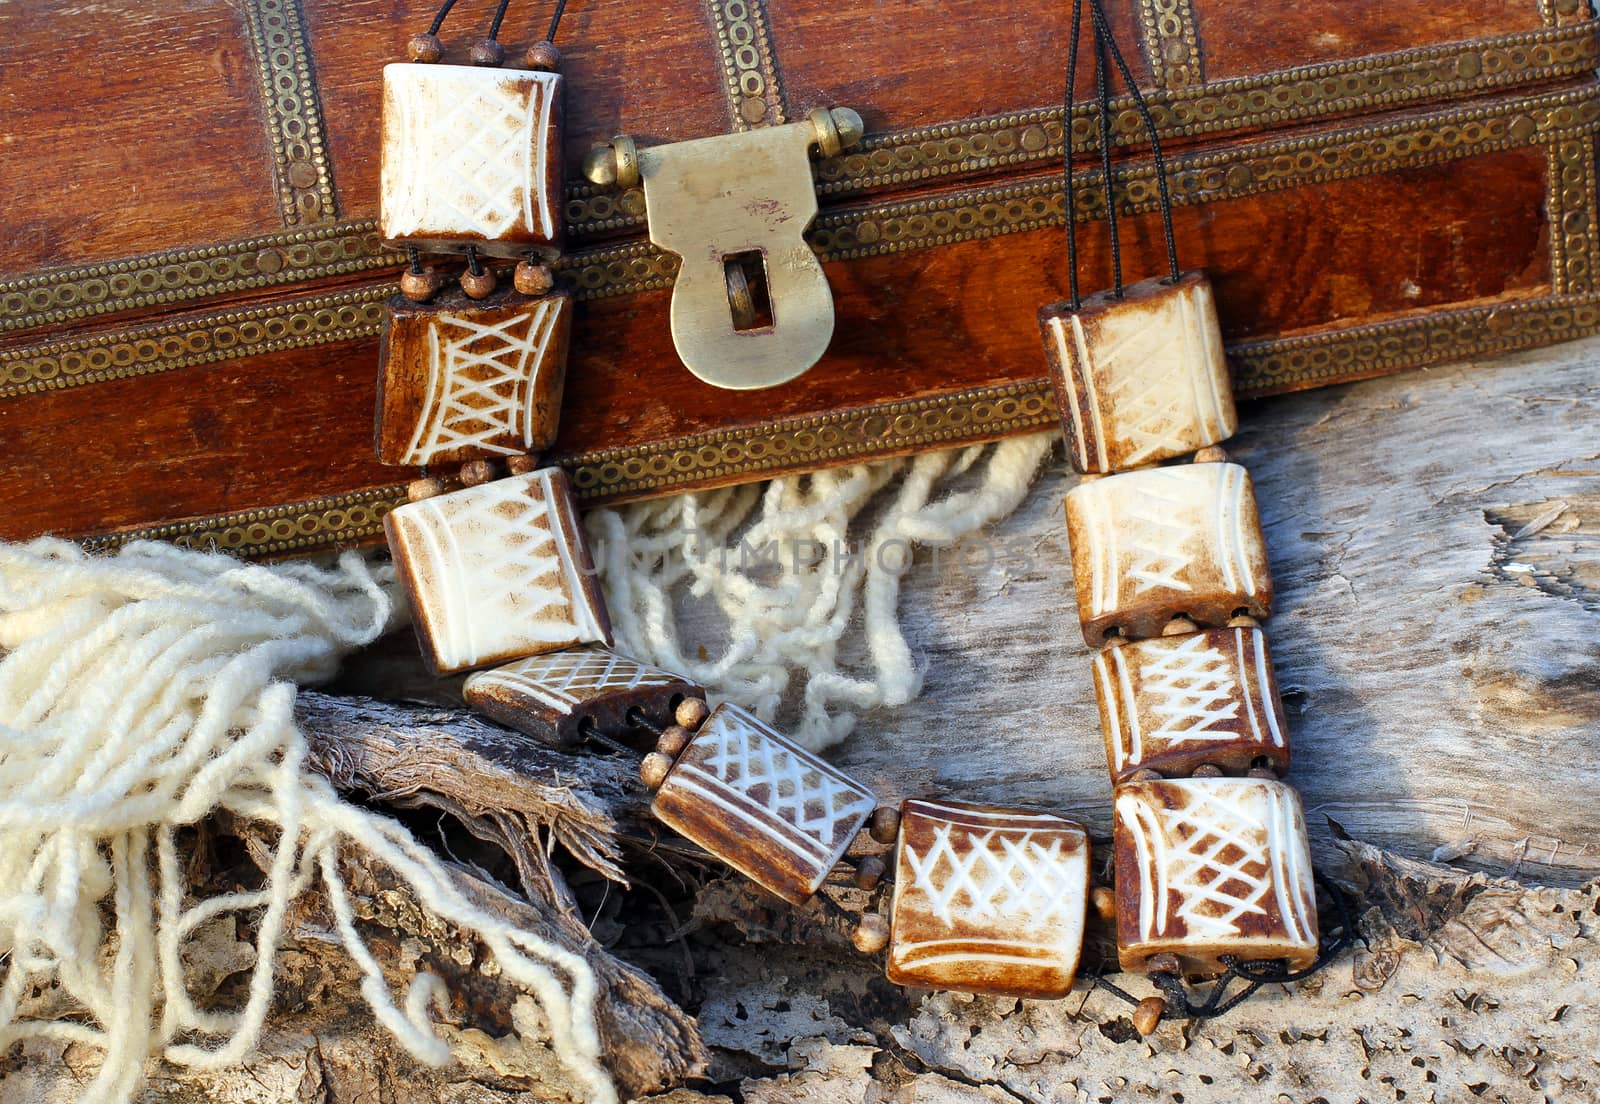 Ethnic handmade wooden necklace and old wooden chest on autumn-style background